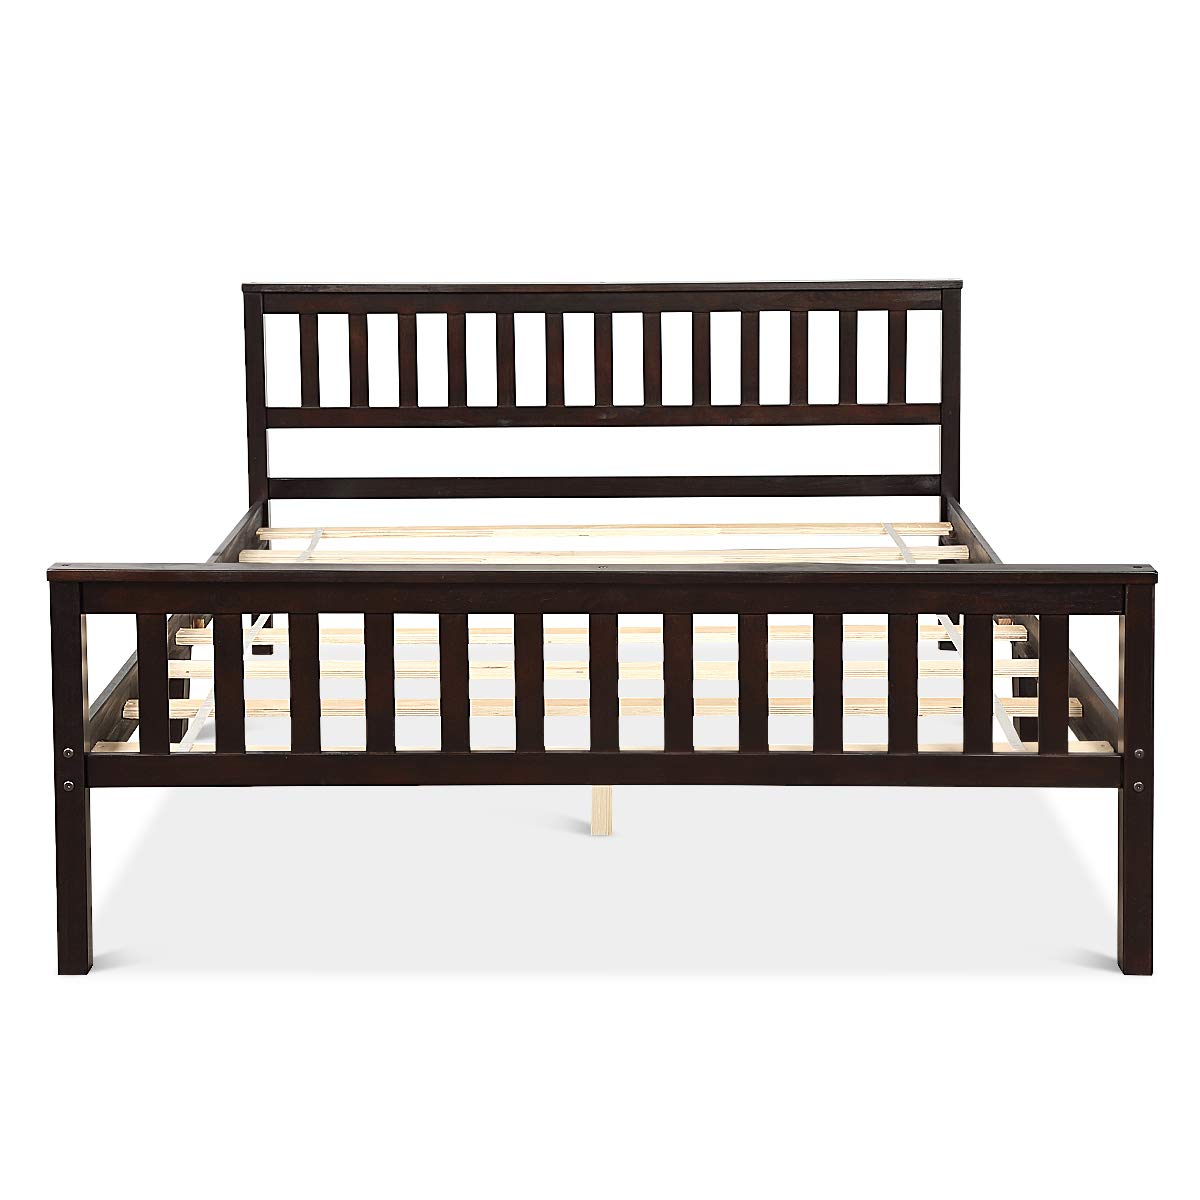 Giantex Wood Slats Great Support with Six Legs, No Box Spring Needed, Antique Espresso (Queen)